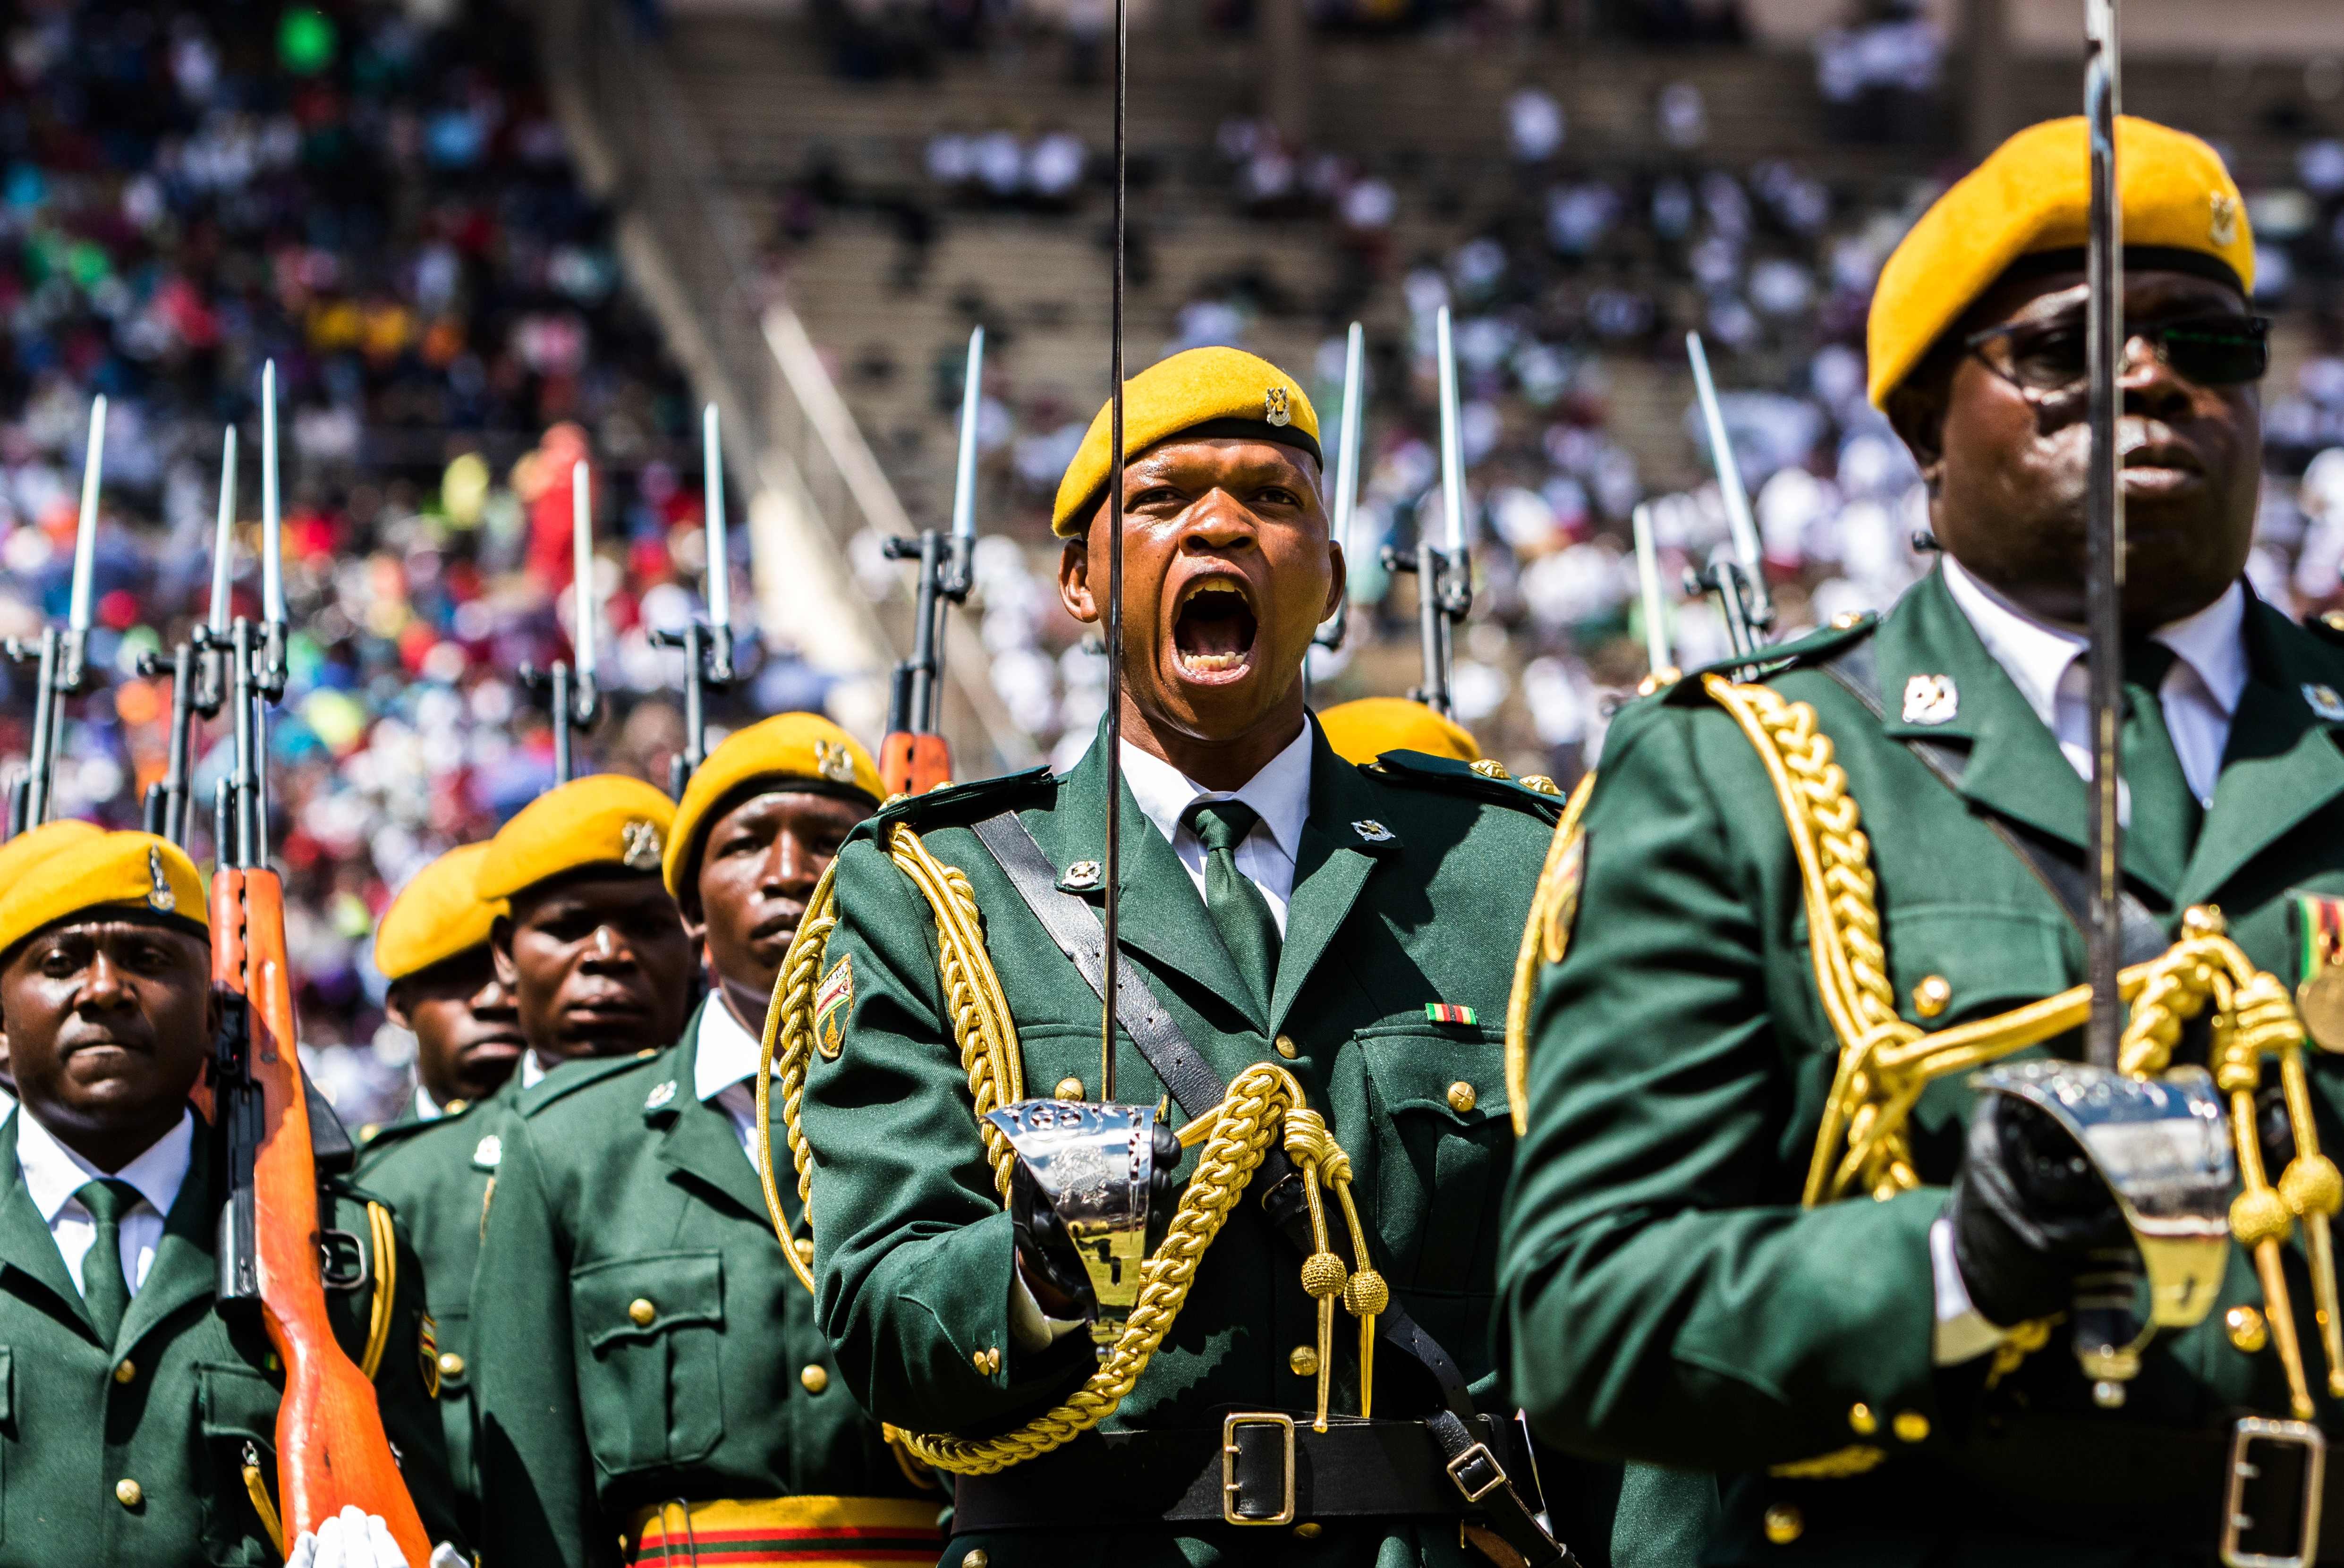 TOPSHOT - The guard of honour parade during the country's 37th Independence Day celebrations at the National Sports Stadium in Harare April 18, 2017. / AFP PHOTO / Jekesai NJIKIZANA / TT / kod 444